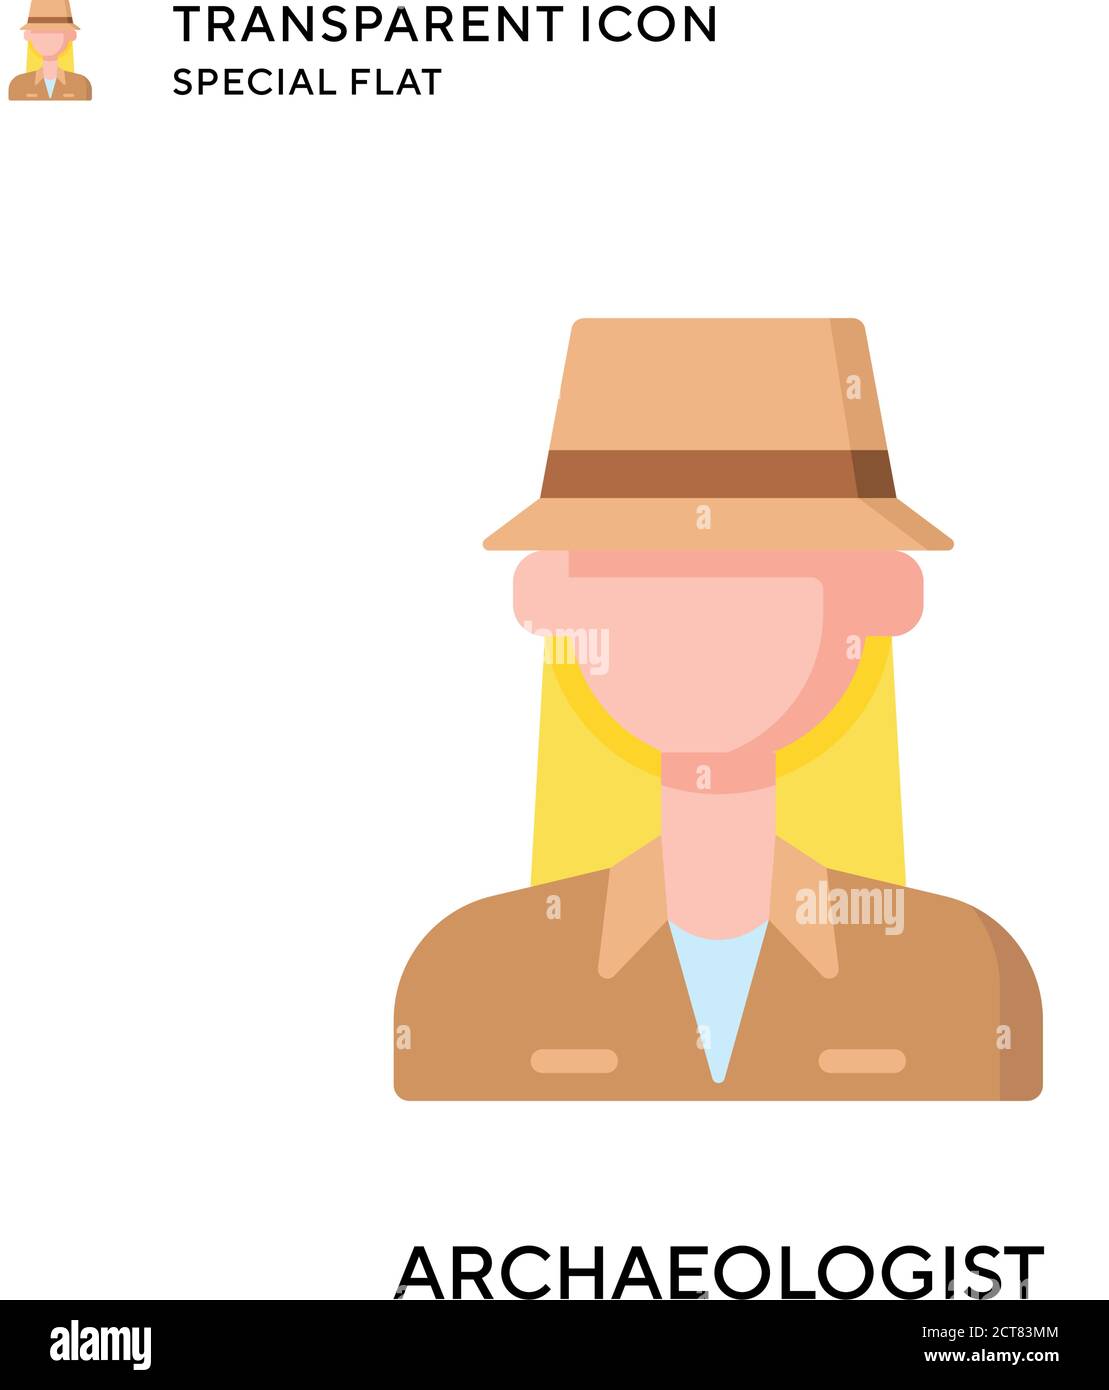 Archaeologist vector icon. Flat style illustration. EPS 10 vector. Stock Vector